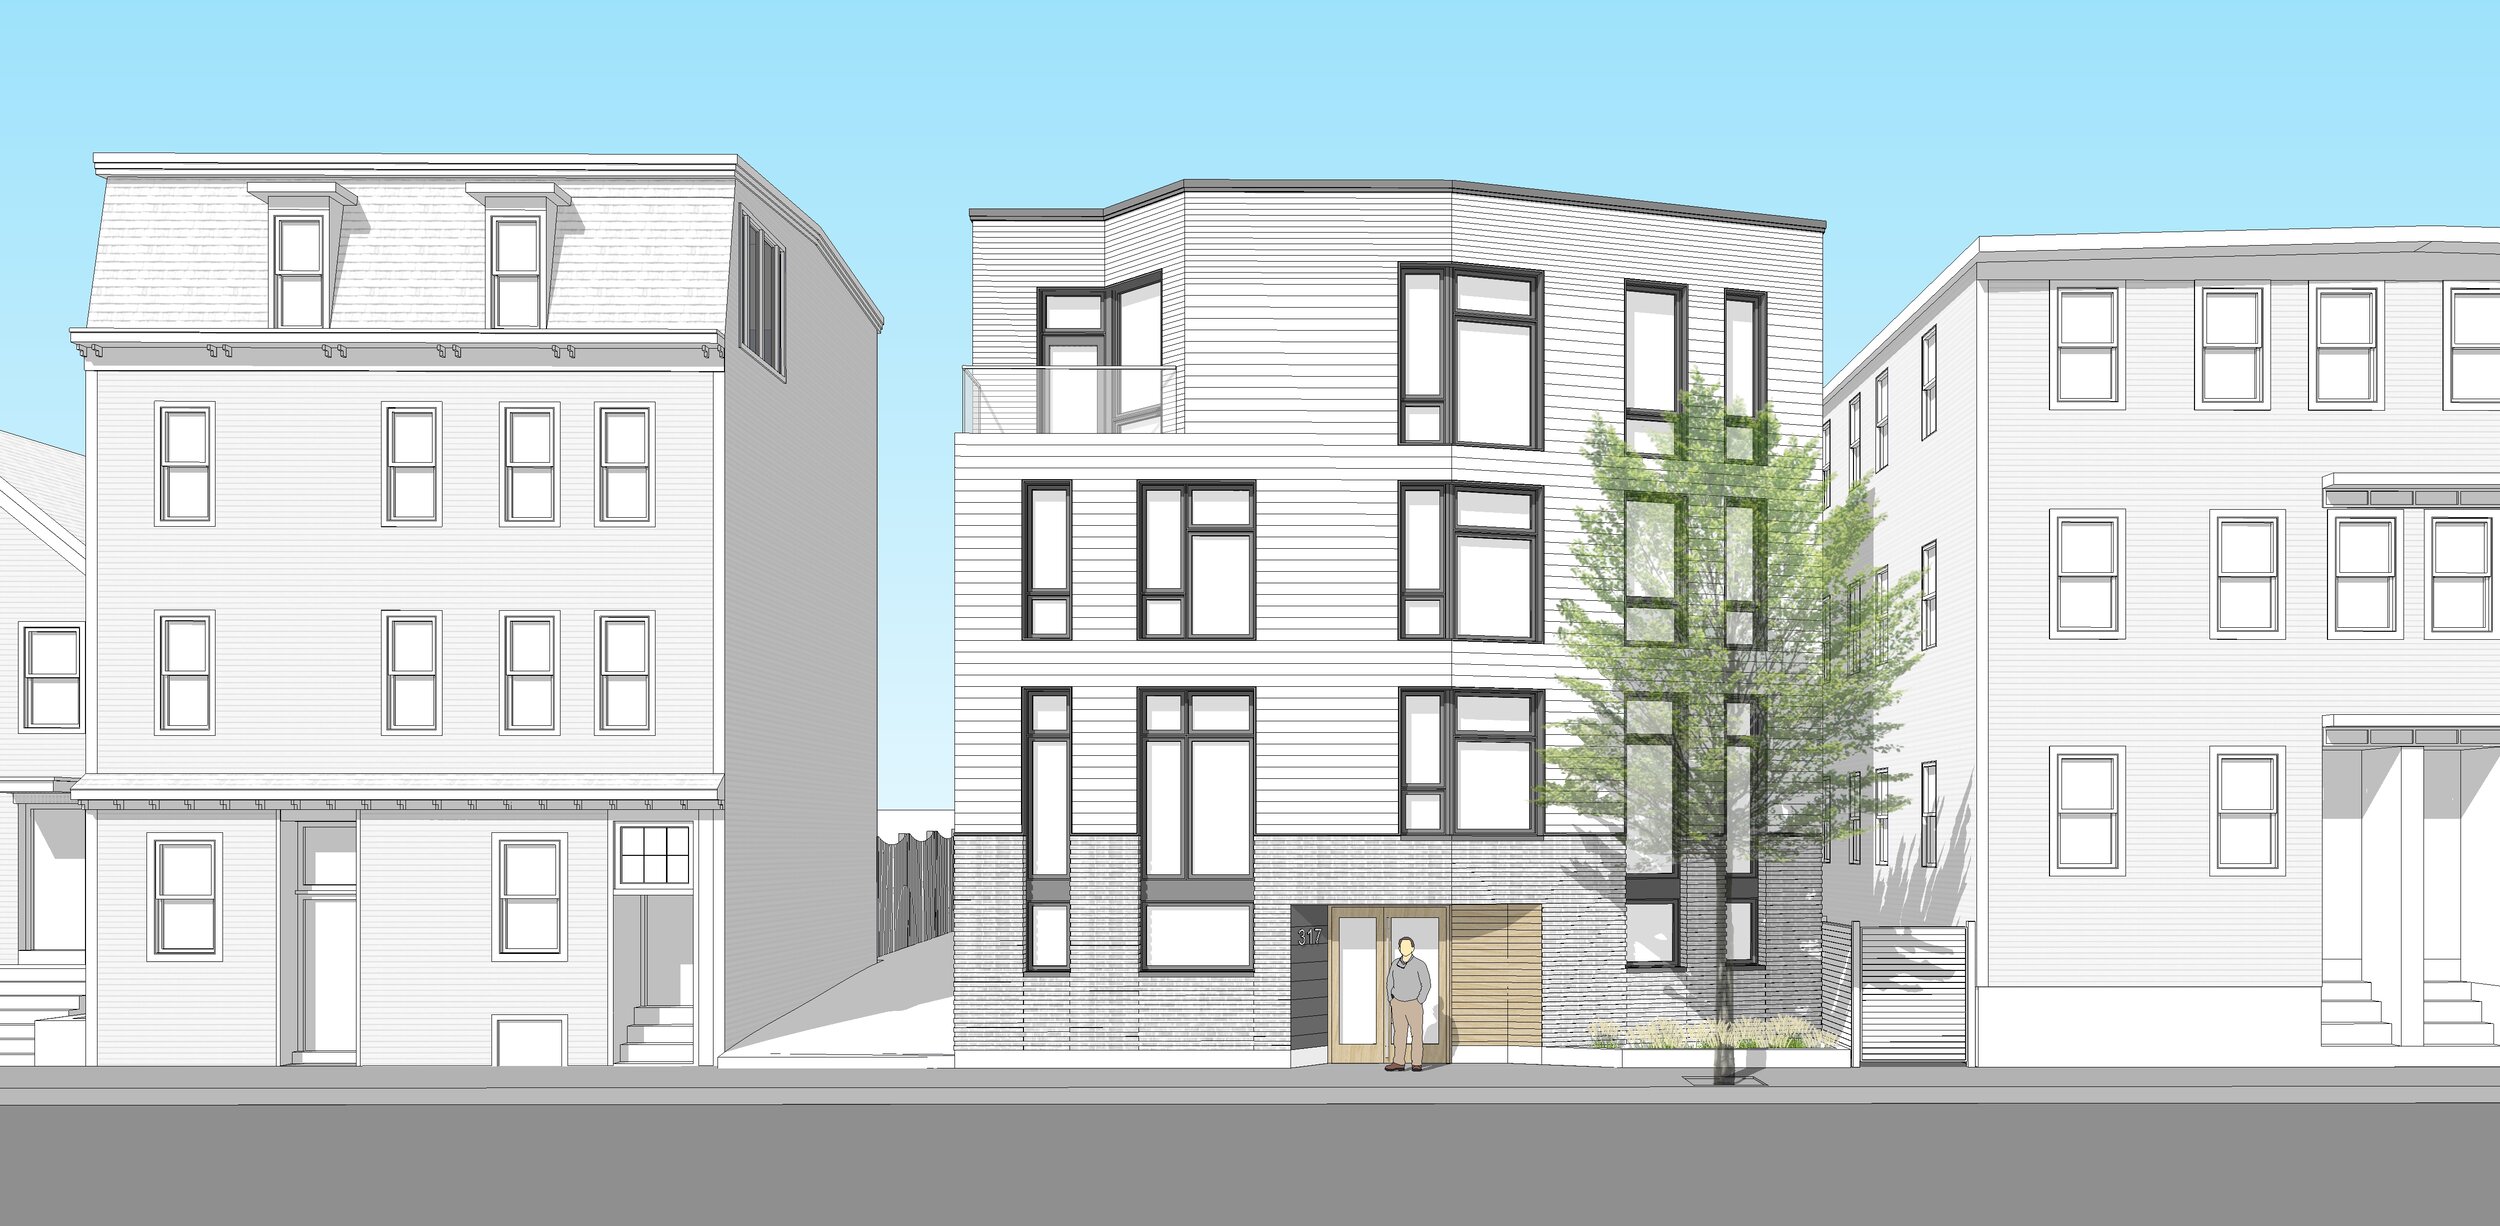 317 W 3rd_Proposed_View 3.jpg